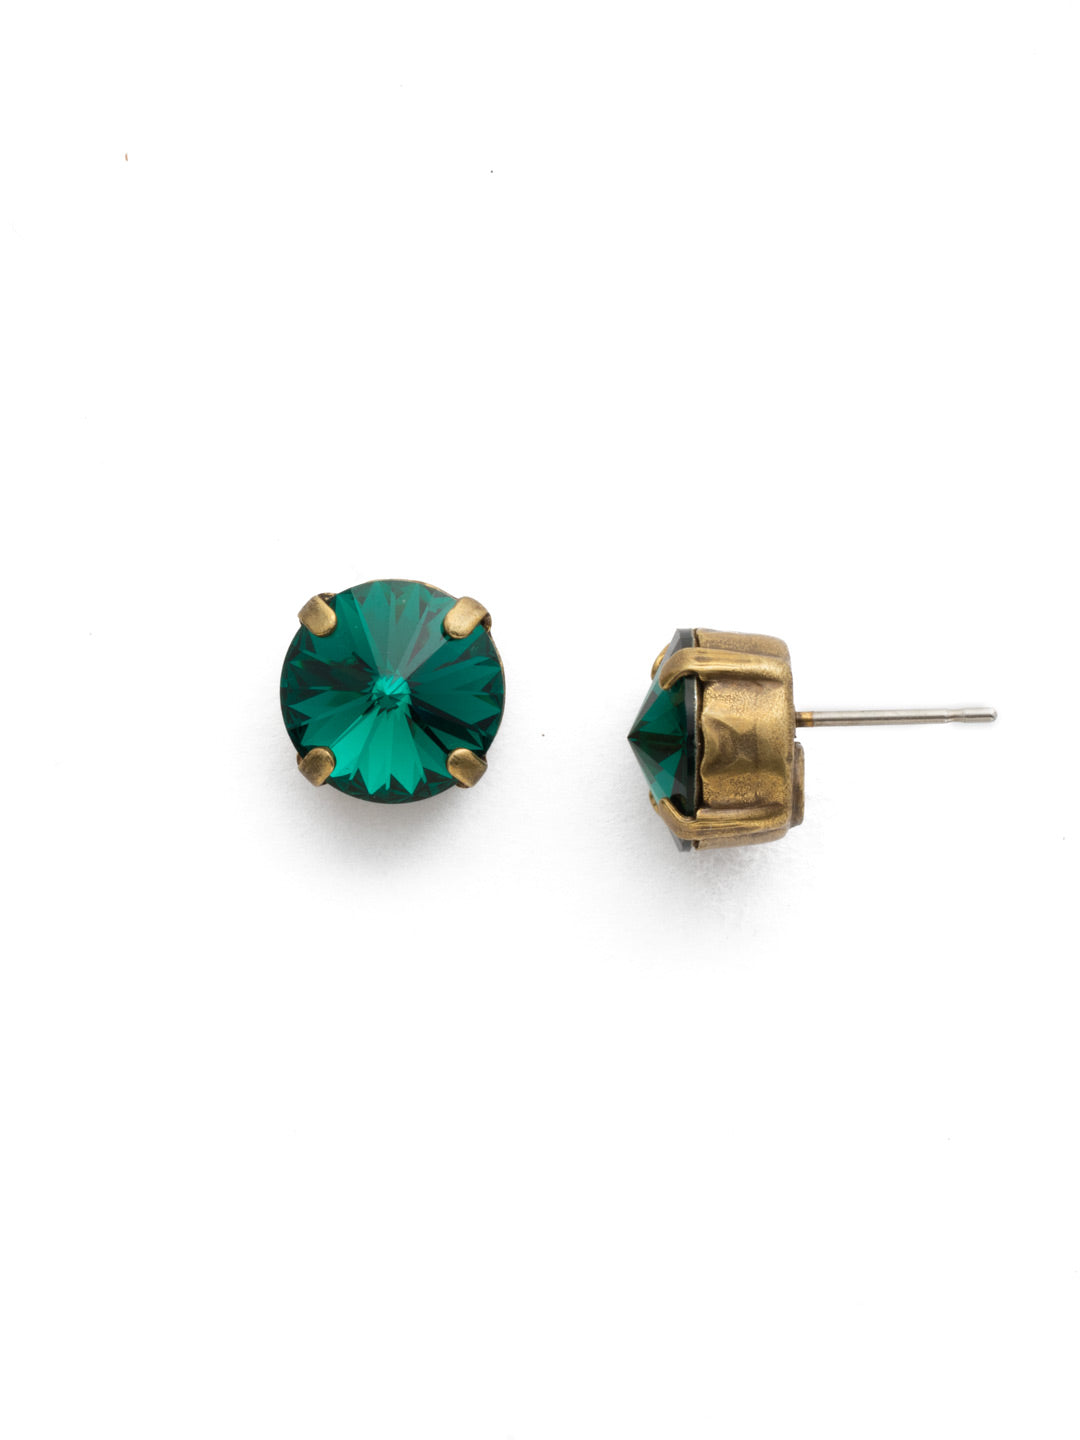 London Stud Earrings - ECM14AGEME - <p>Everyone needs a great pair of studs. Add some classic sparkle to any occasion with these stud earrings. Need help picking a stud? <a href="https://www.sorrelli.com/blogs/sisterhood/round-stud-earrings-101-a-rundown-of-sizes-styles-and-sparkle">Check out our size guide!</a> From Sorrelli's Emerald collection in our Antique Gold-tone finish.</p>